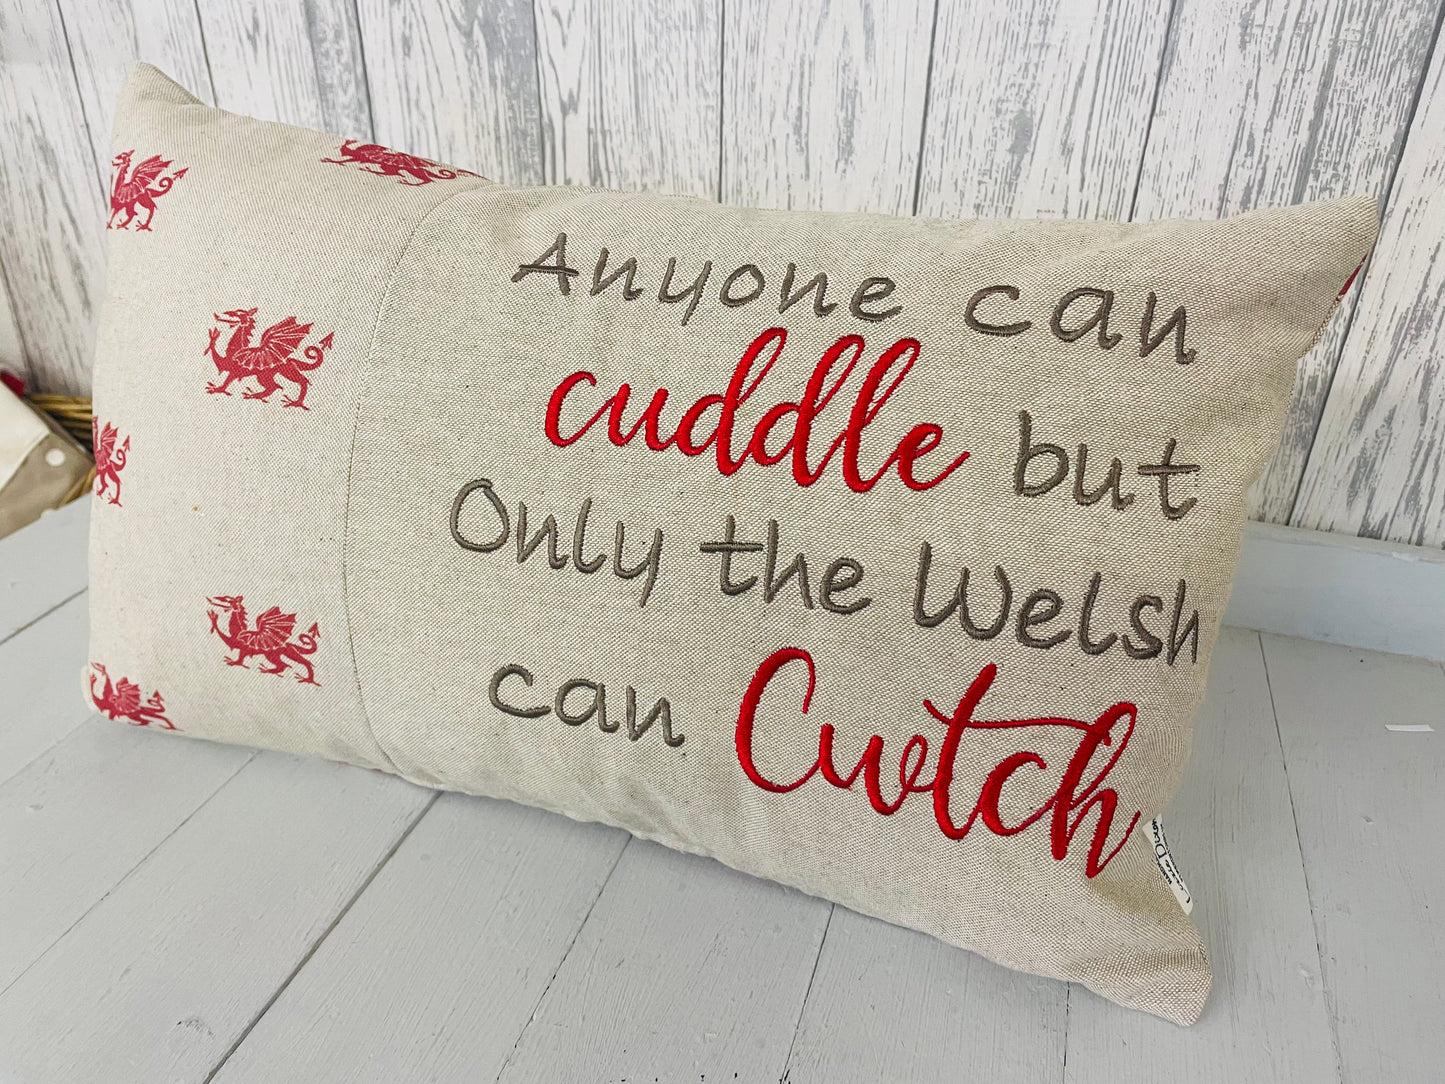 Anyone can Cuddle but only the Welsh can Cwtch-Welsh dragon panel long cushion